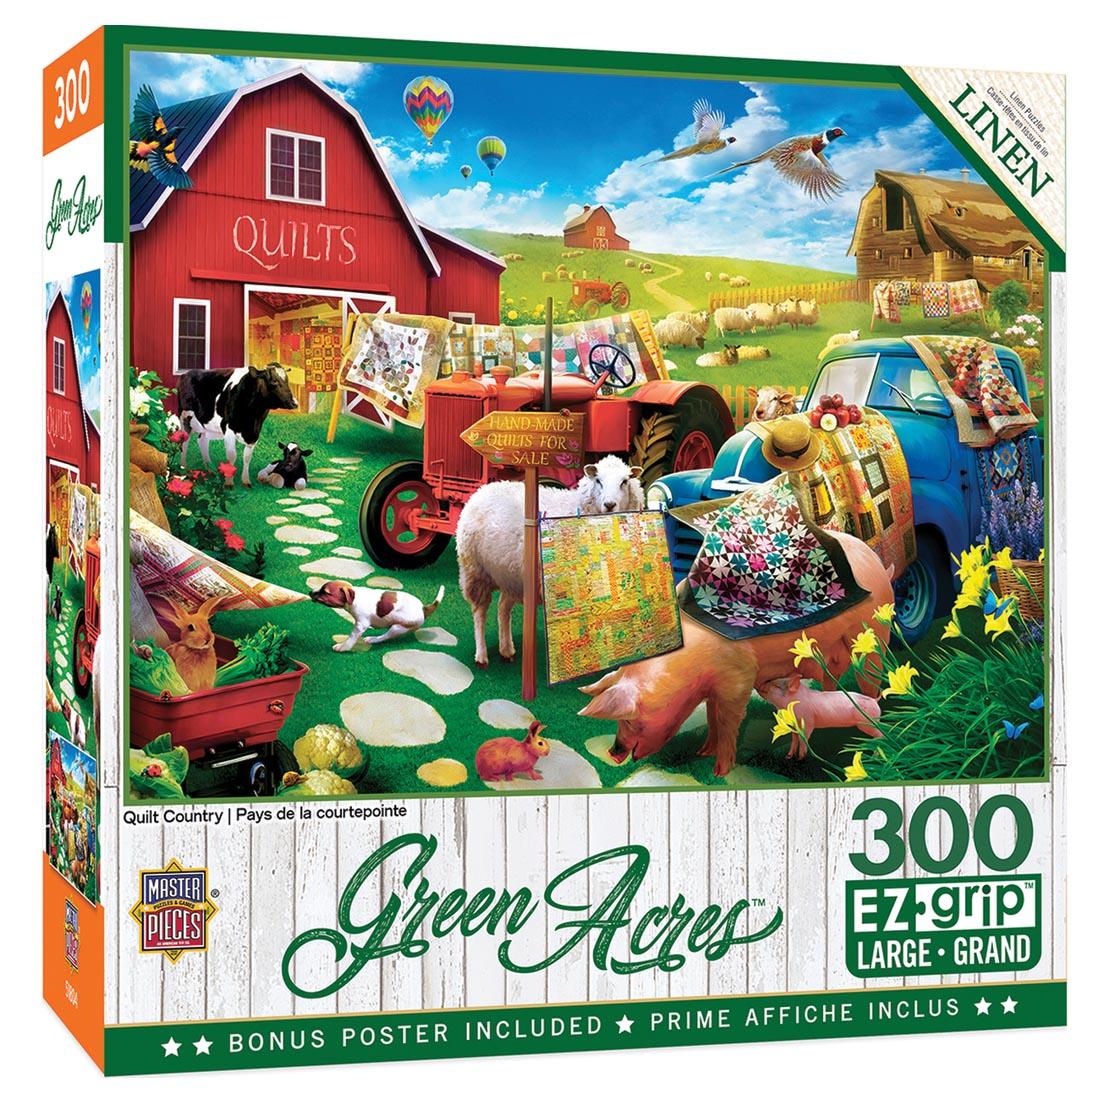 Green Acres Series Quilt Country 300-Piece EZ Grip Puzzle by MasterPieces